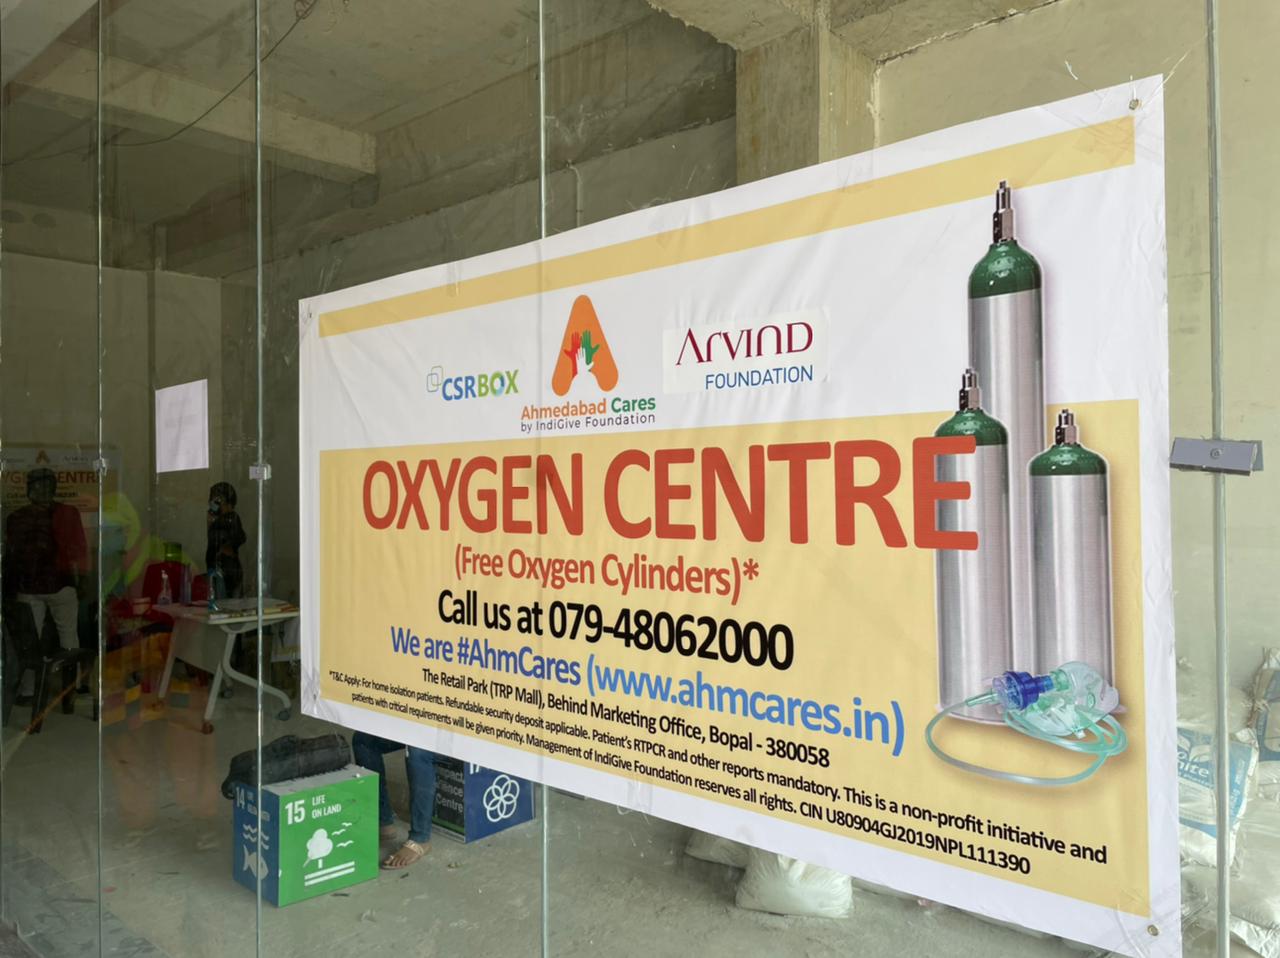 Oxygen Centre - an initiative by Arvind Foundation and CSRBOX for Helping Covid-19 Patients to Get Oxygen Cylinders